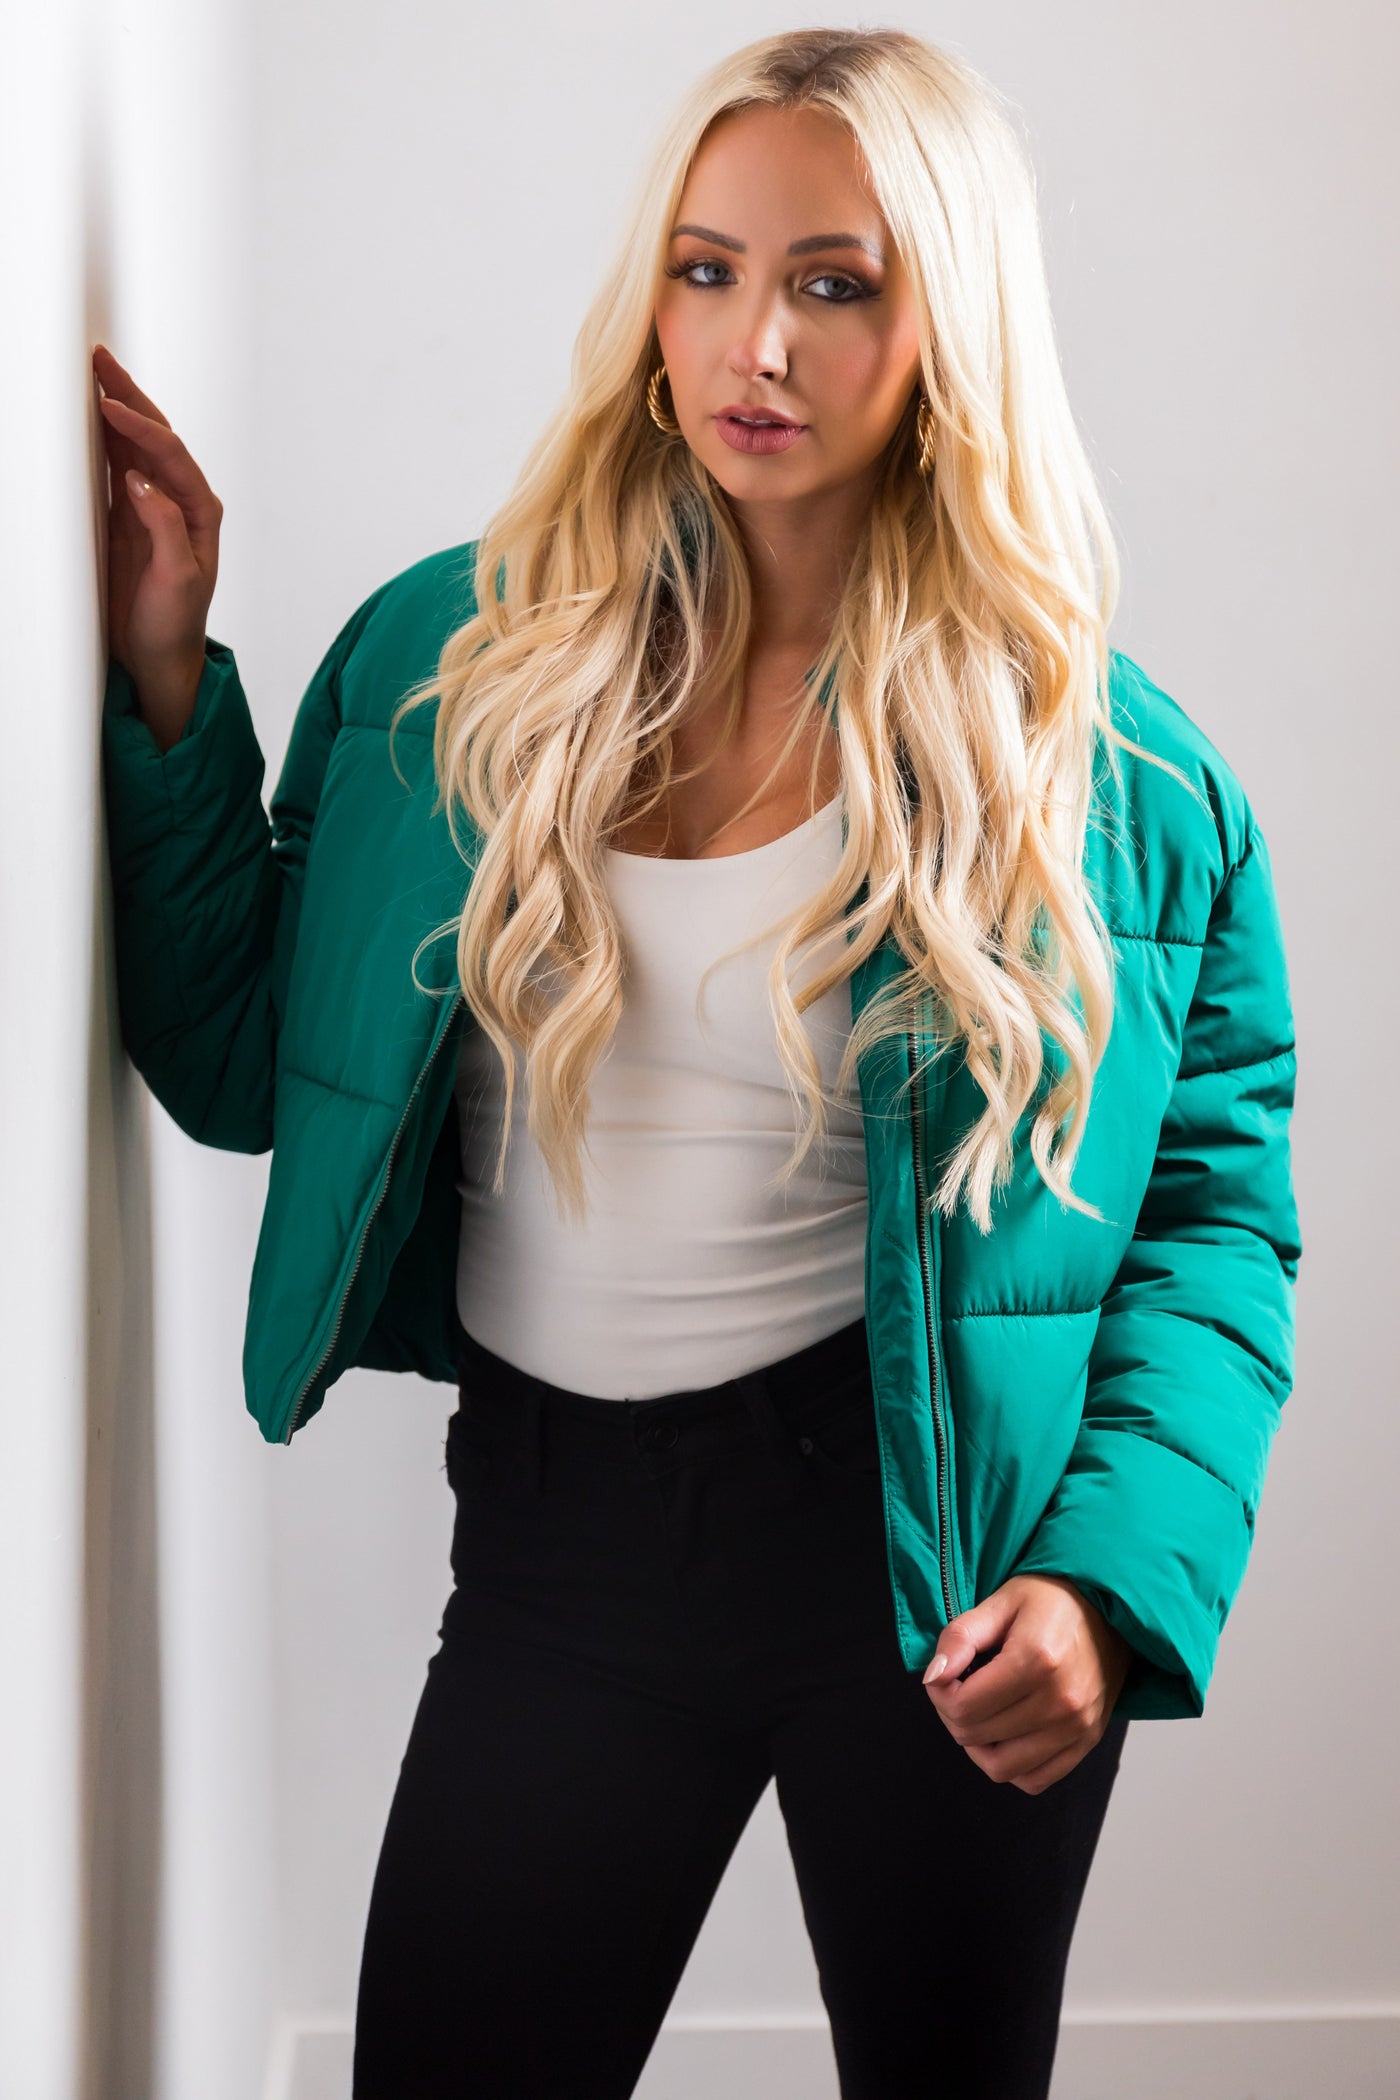 Pine Green Zip Up Quilted Puffer Jacket